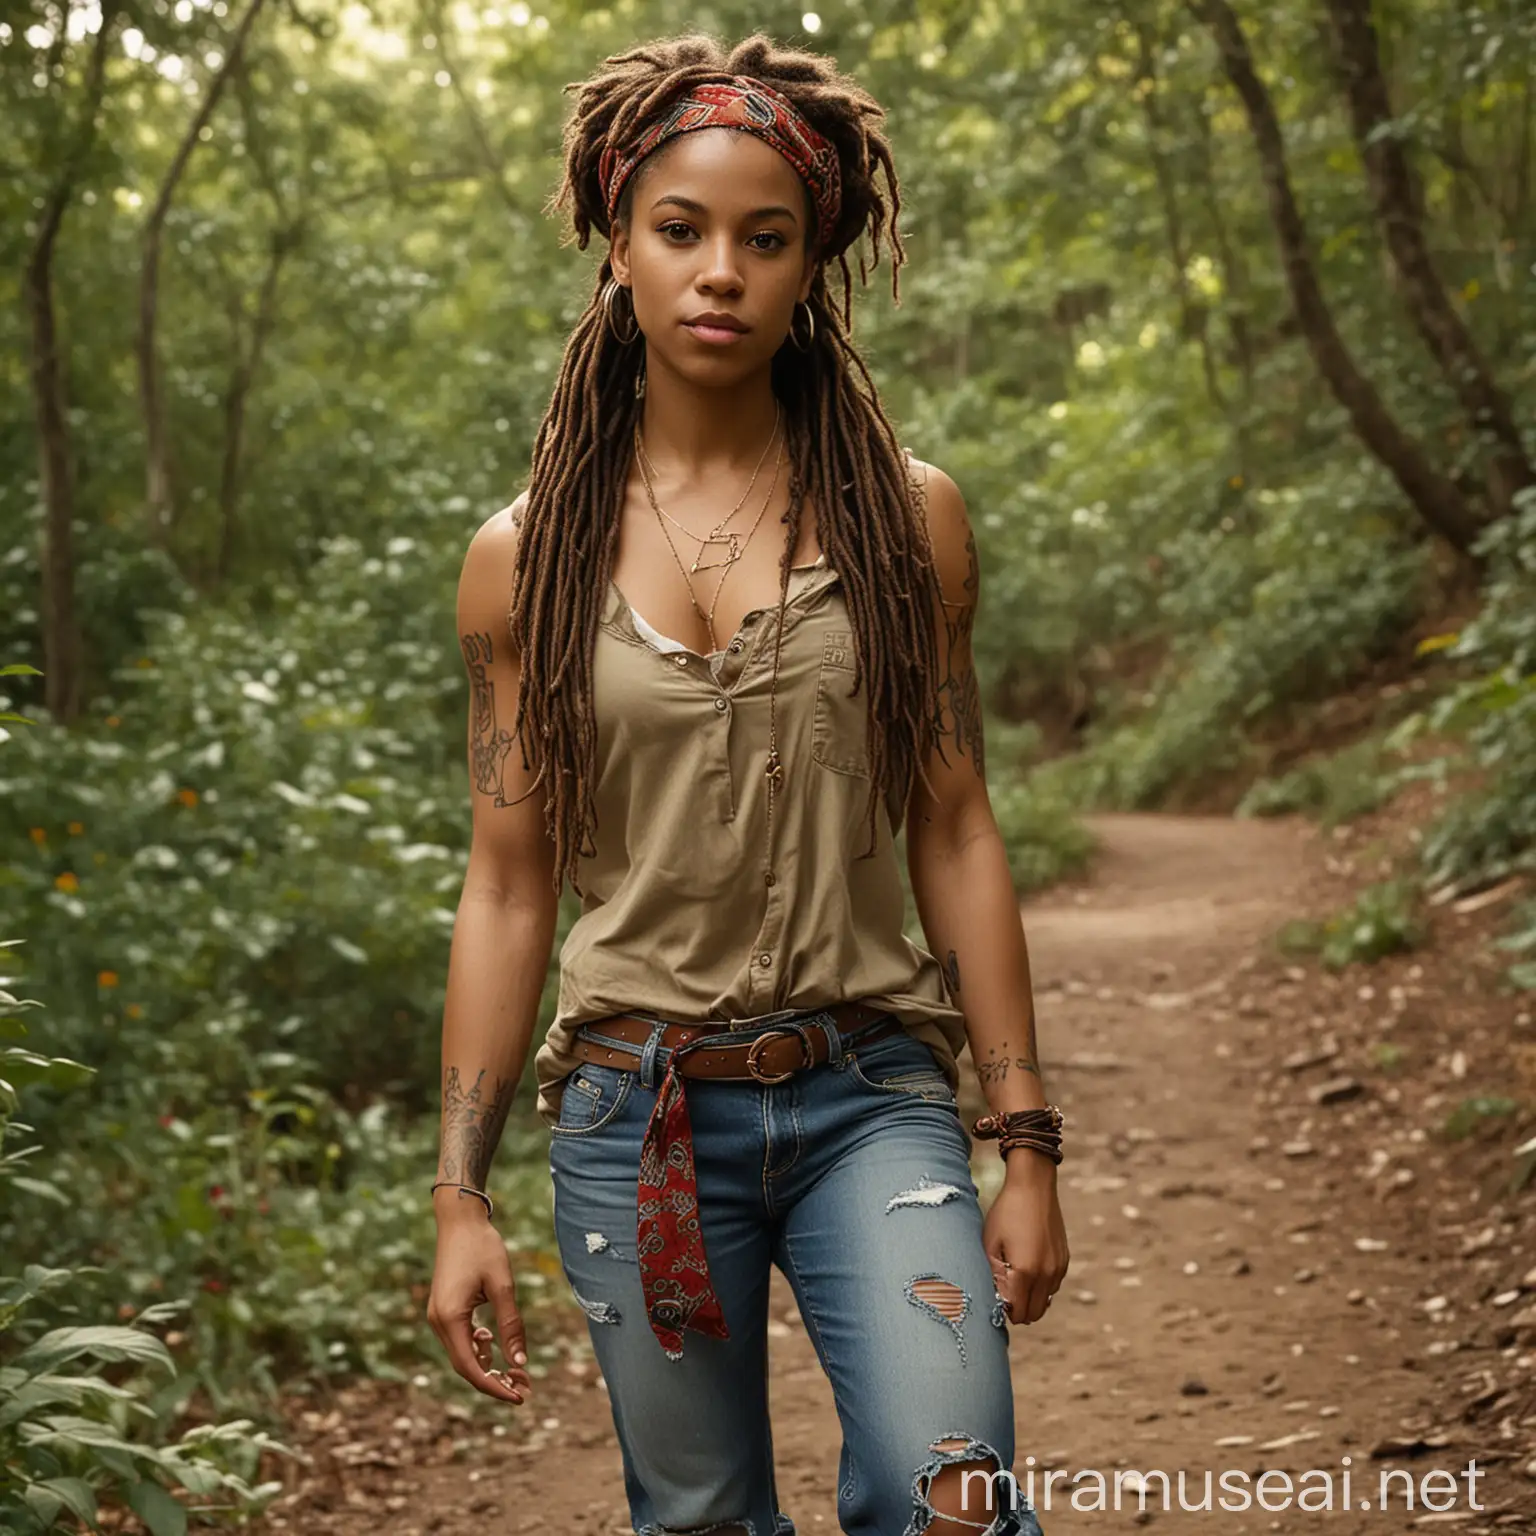 Muscular Black Woman with Dreadlock Hair and Tattoos in Outdoor Attire